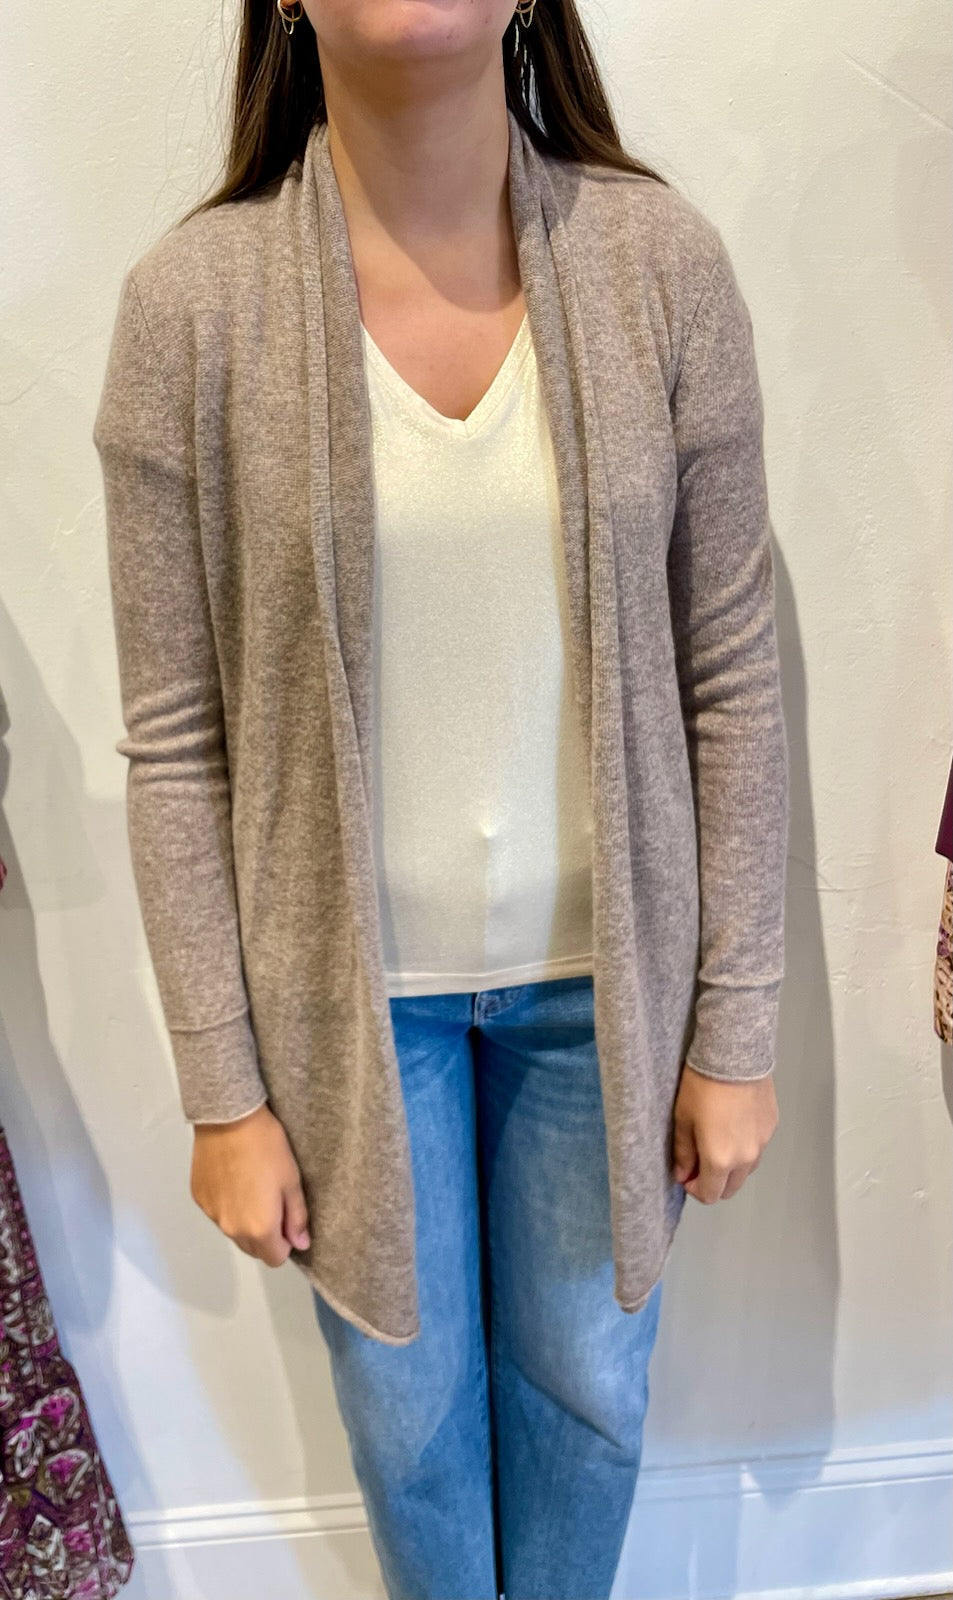 Cashmere Open Cardigan by InCashmere in Heather Almond